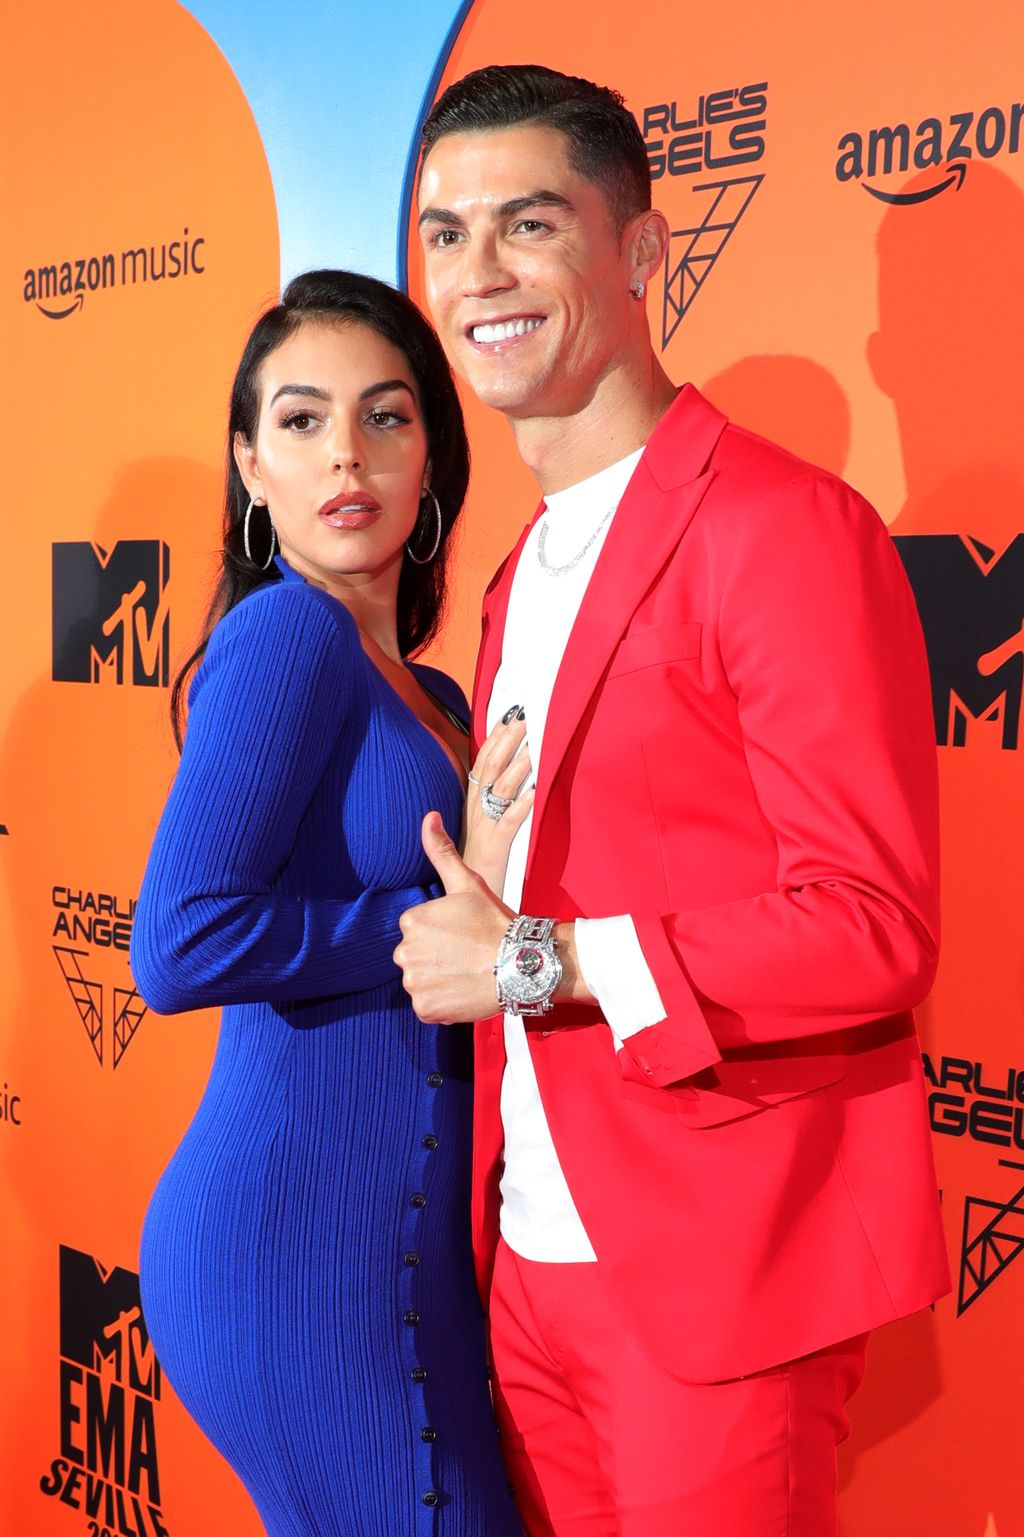 SEVILLE, SPAIN - NOVEMBER 03: Georgina Rodriguez and Cristiano Ronaldo attend the MTV EMAs 2019 at FIBES Conference and Exhibition Centre on November 03, 2019 in Seville, Spain. (Photo by Andreas Rentz/MTV 2019/Getty Images for MTV)